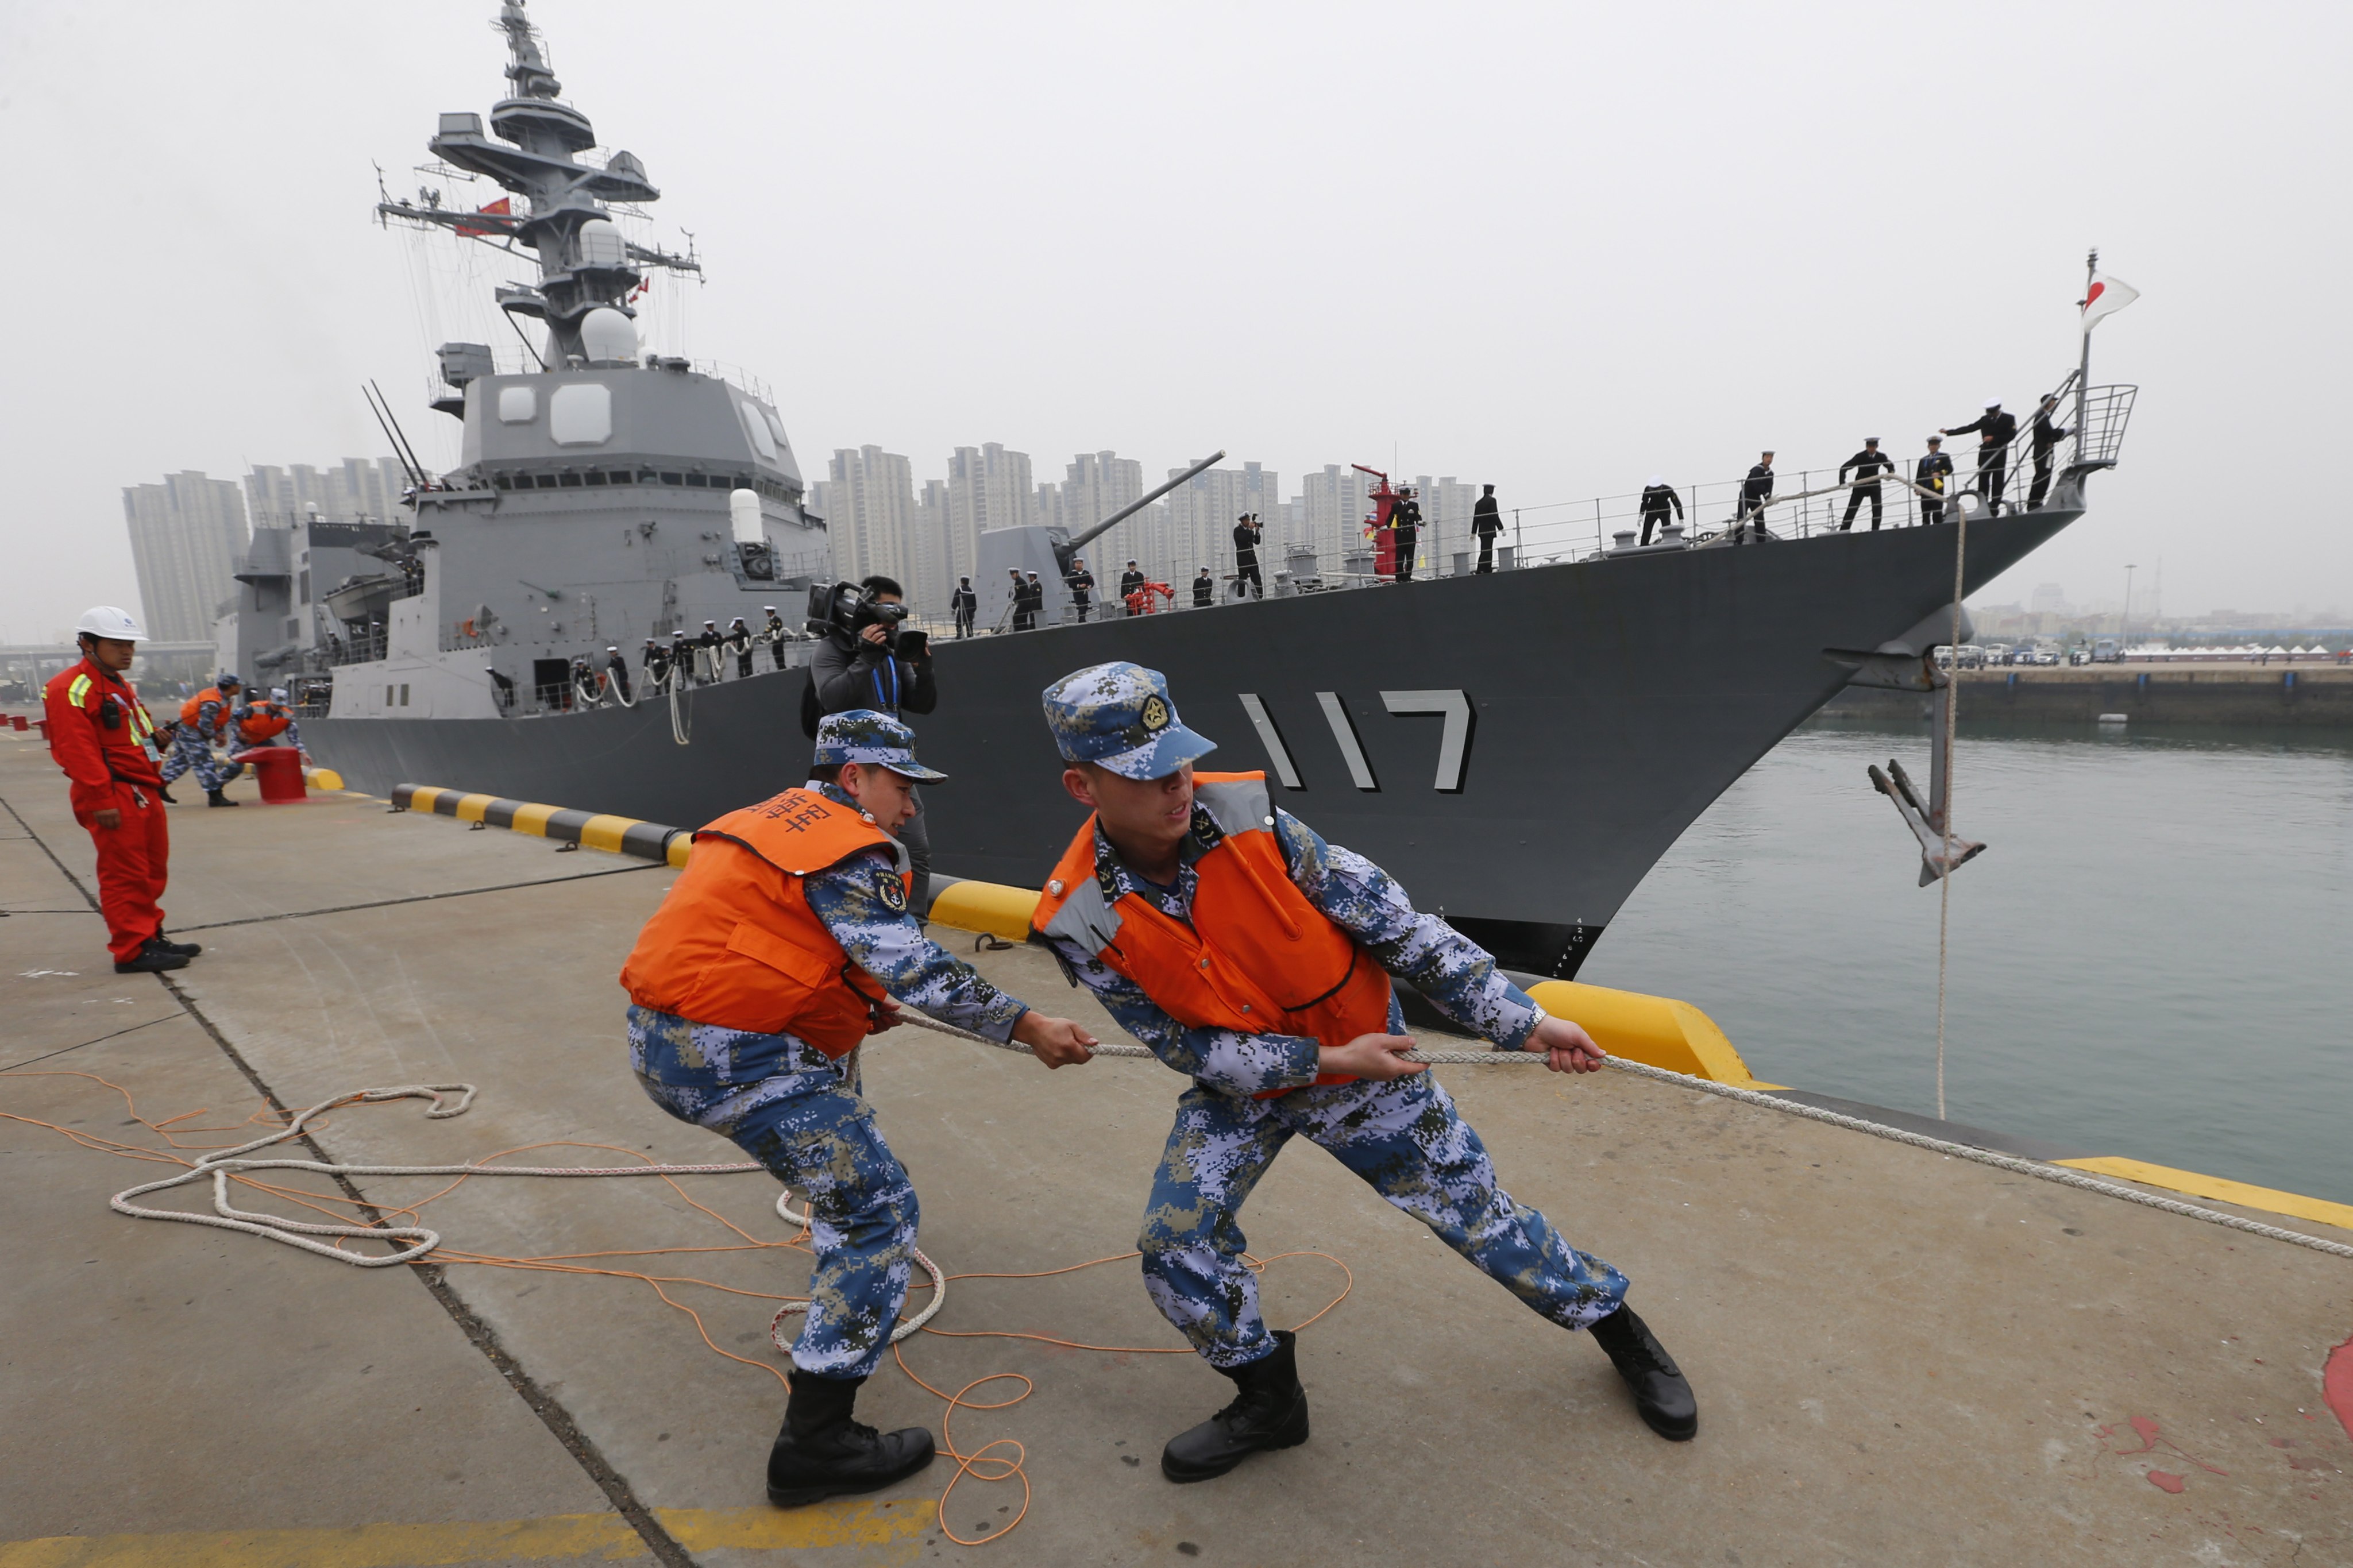 Japanese destroyer Suzutsuki docks at a port in China’s Qingdao in 2019. Photo: EPA-EFE